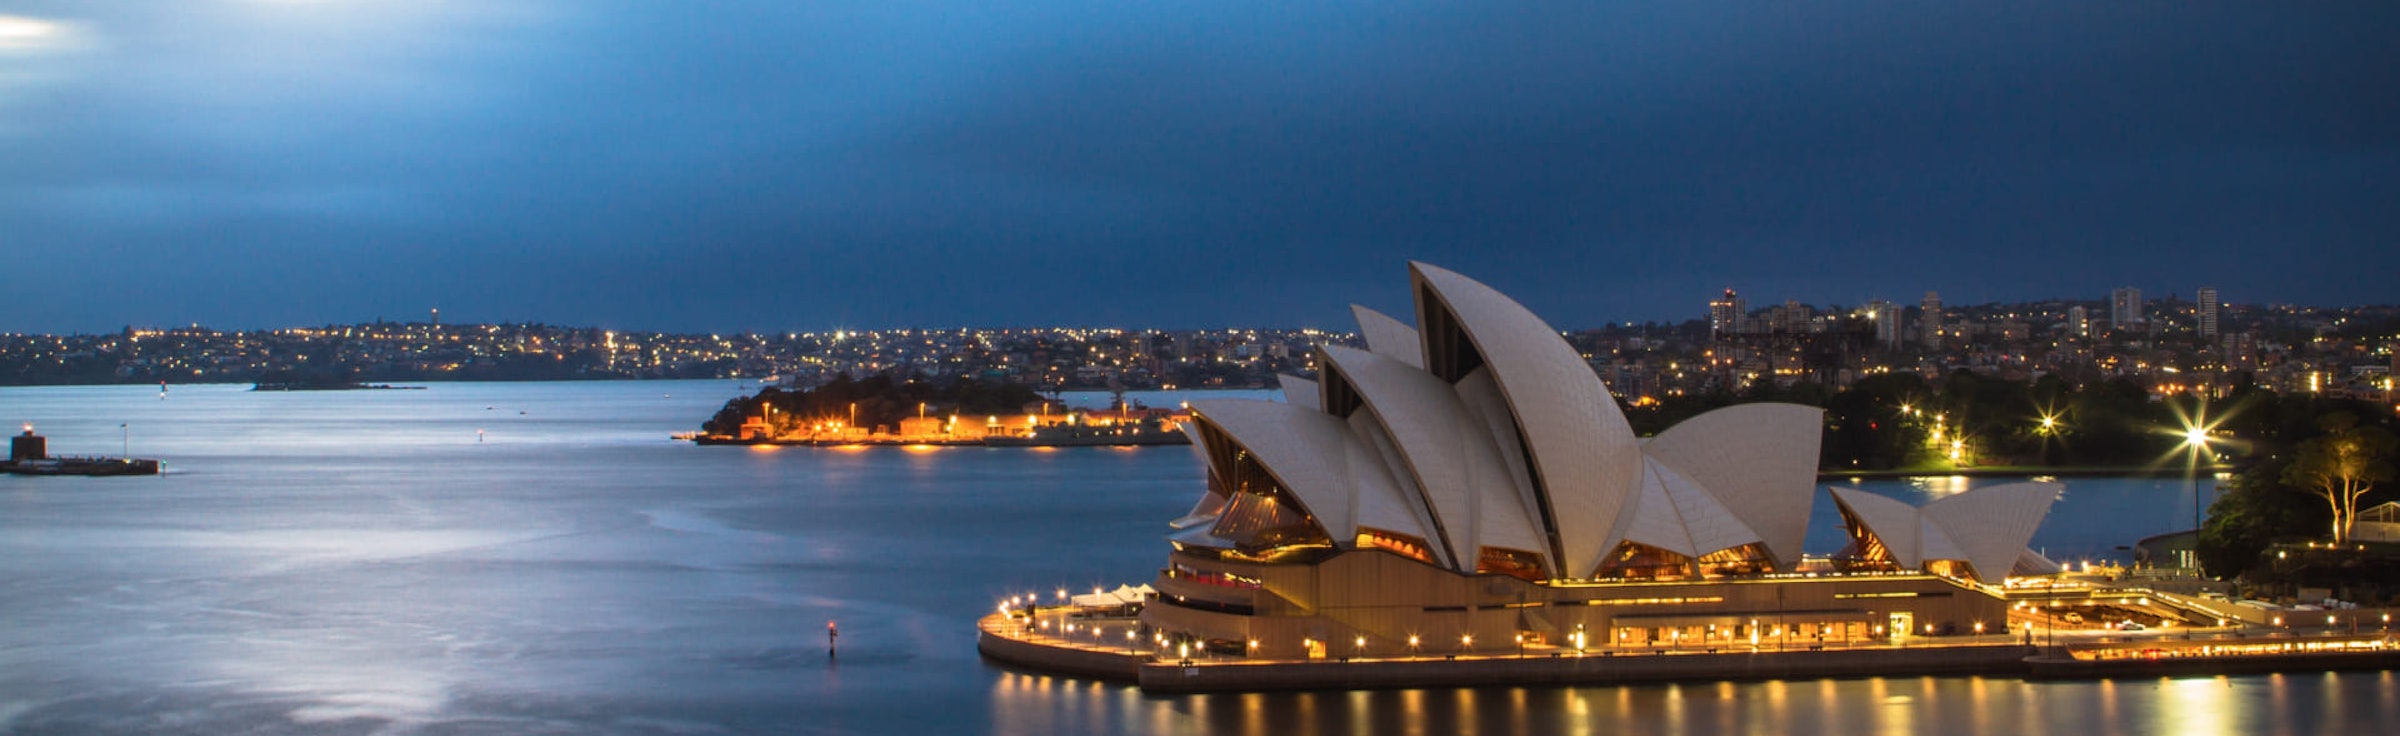 Luxury Holiday Packages To Australia